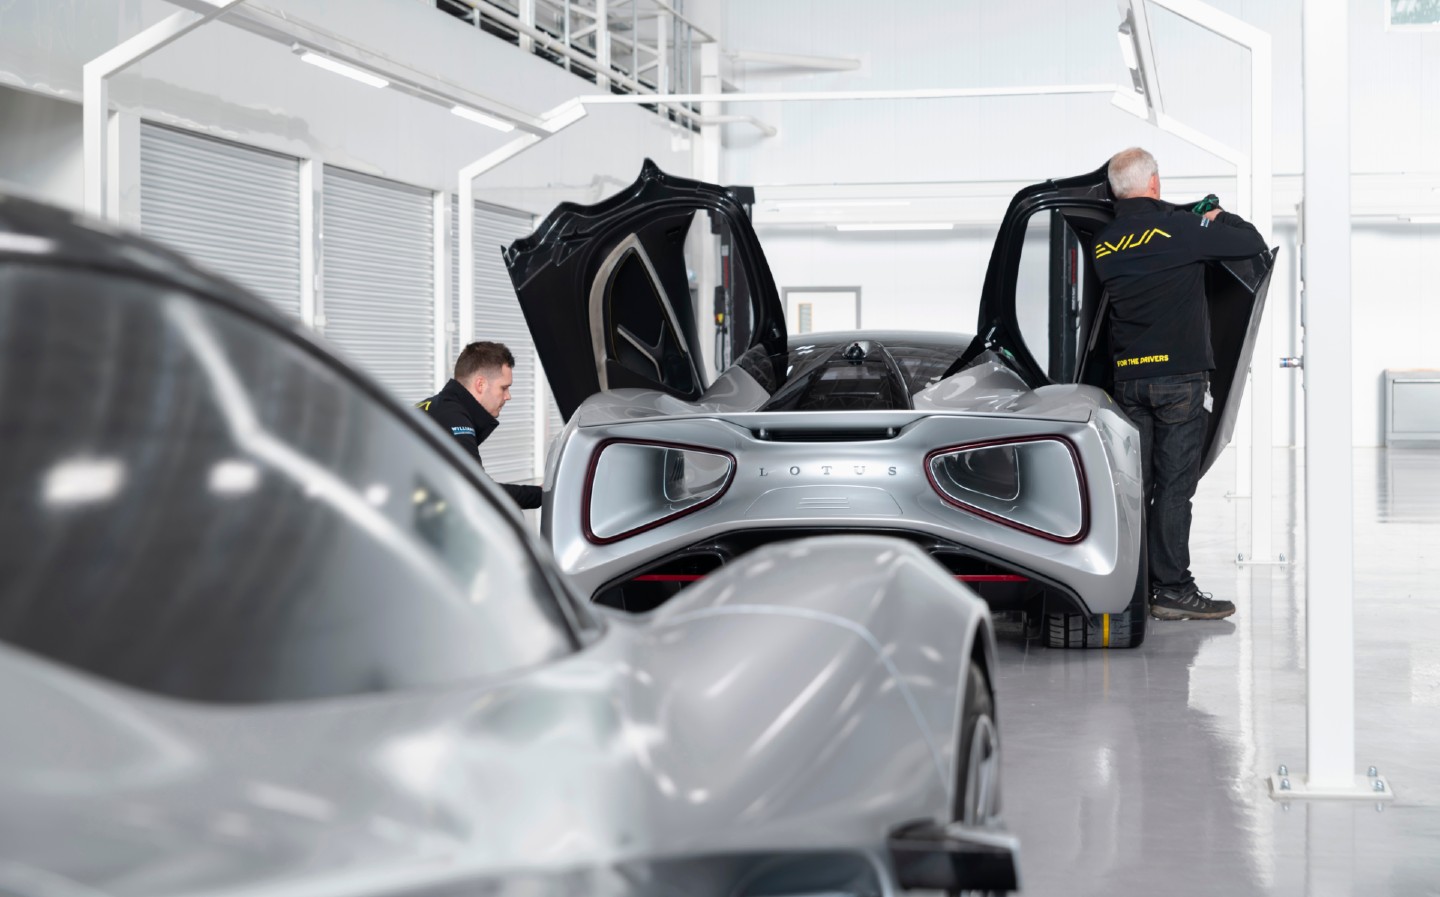 Lotus boss Phil Popham interview with Will Dron: Evija hypercar back on track as company expands after lockdown - Evija production